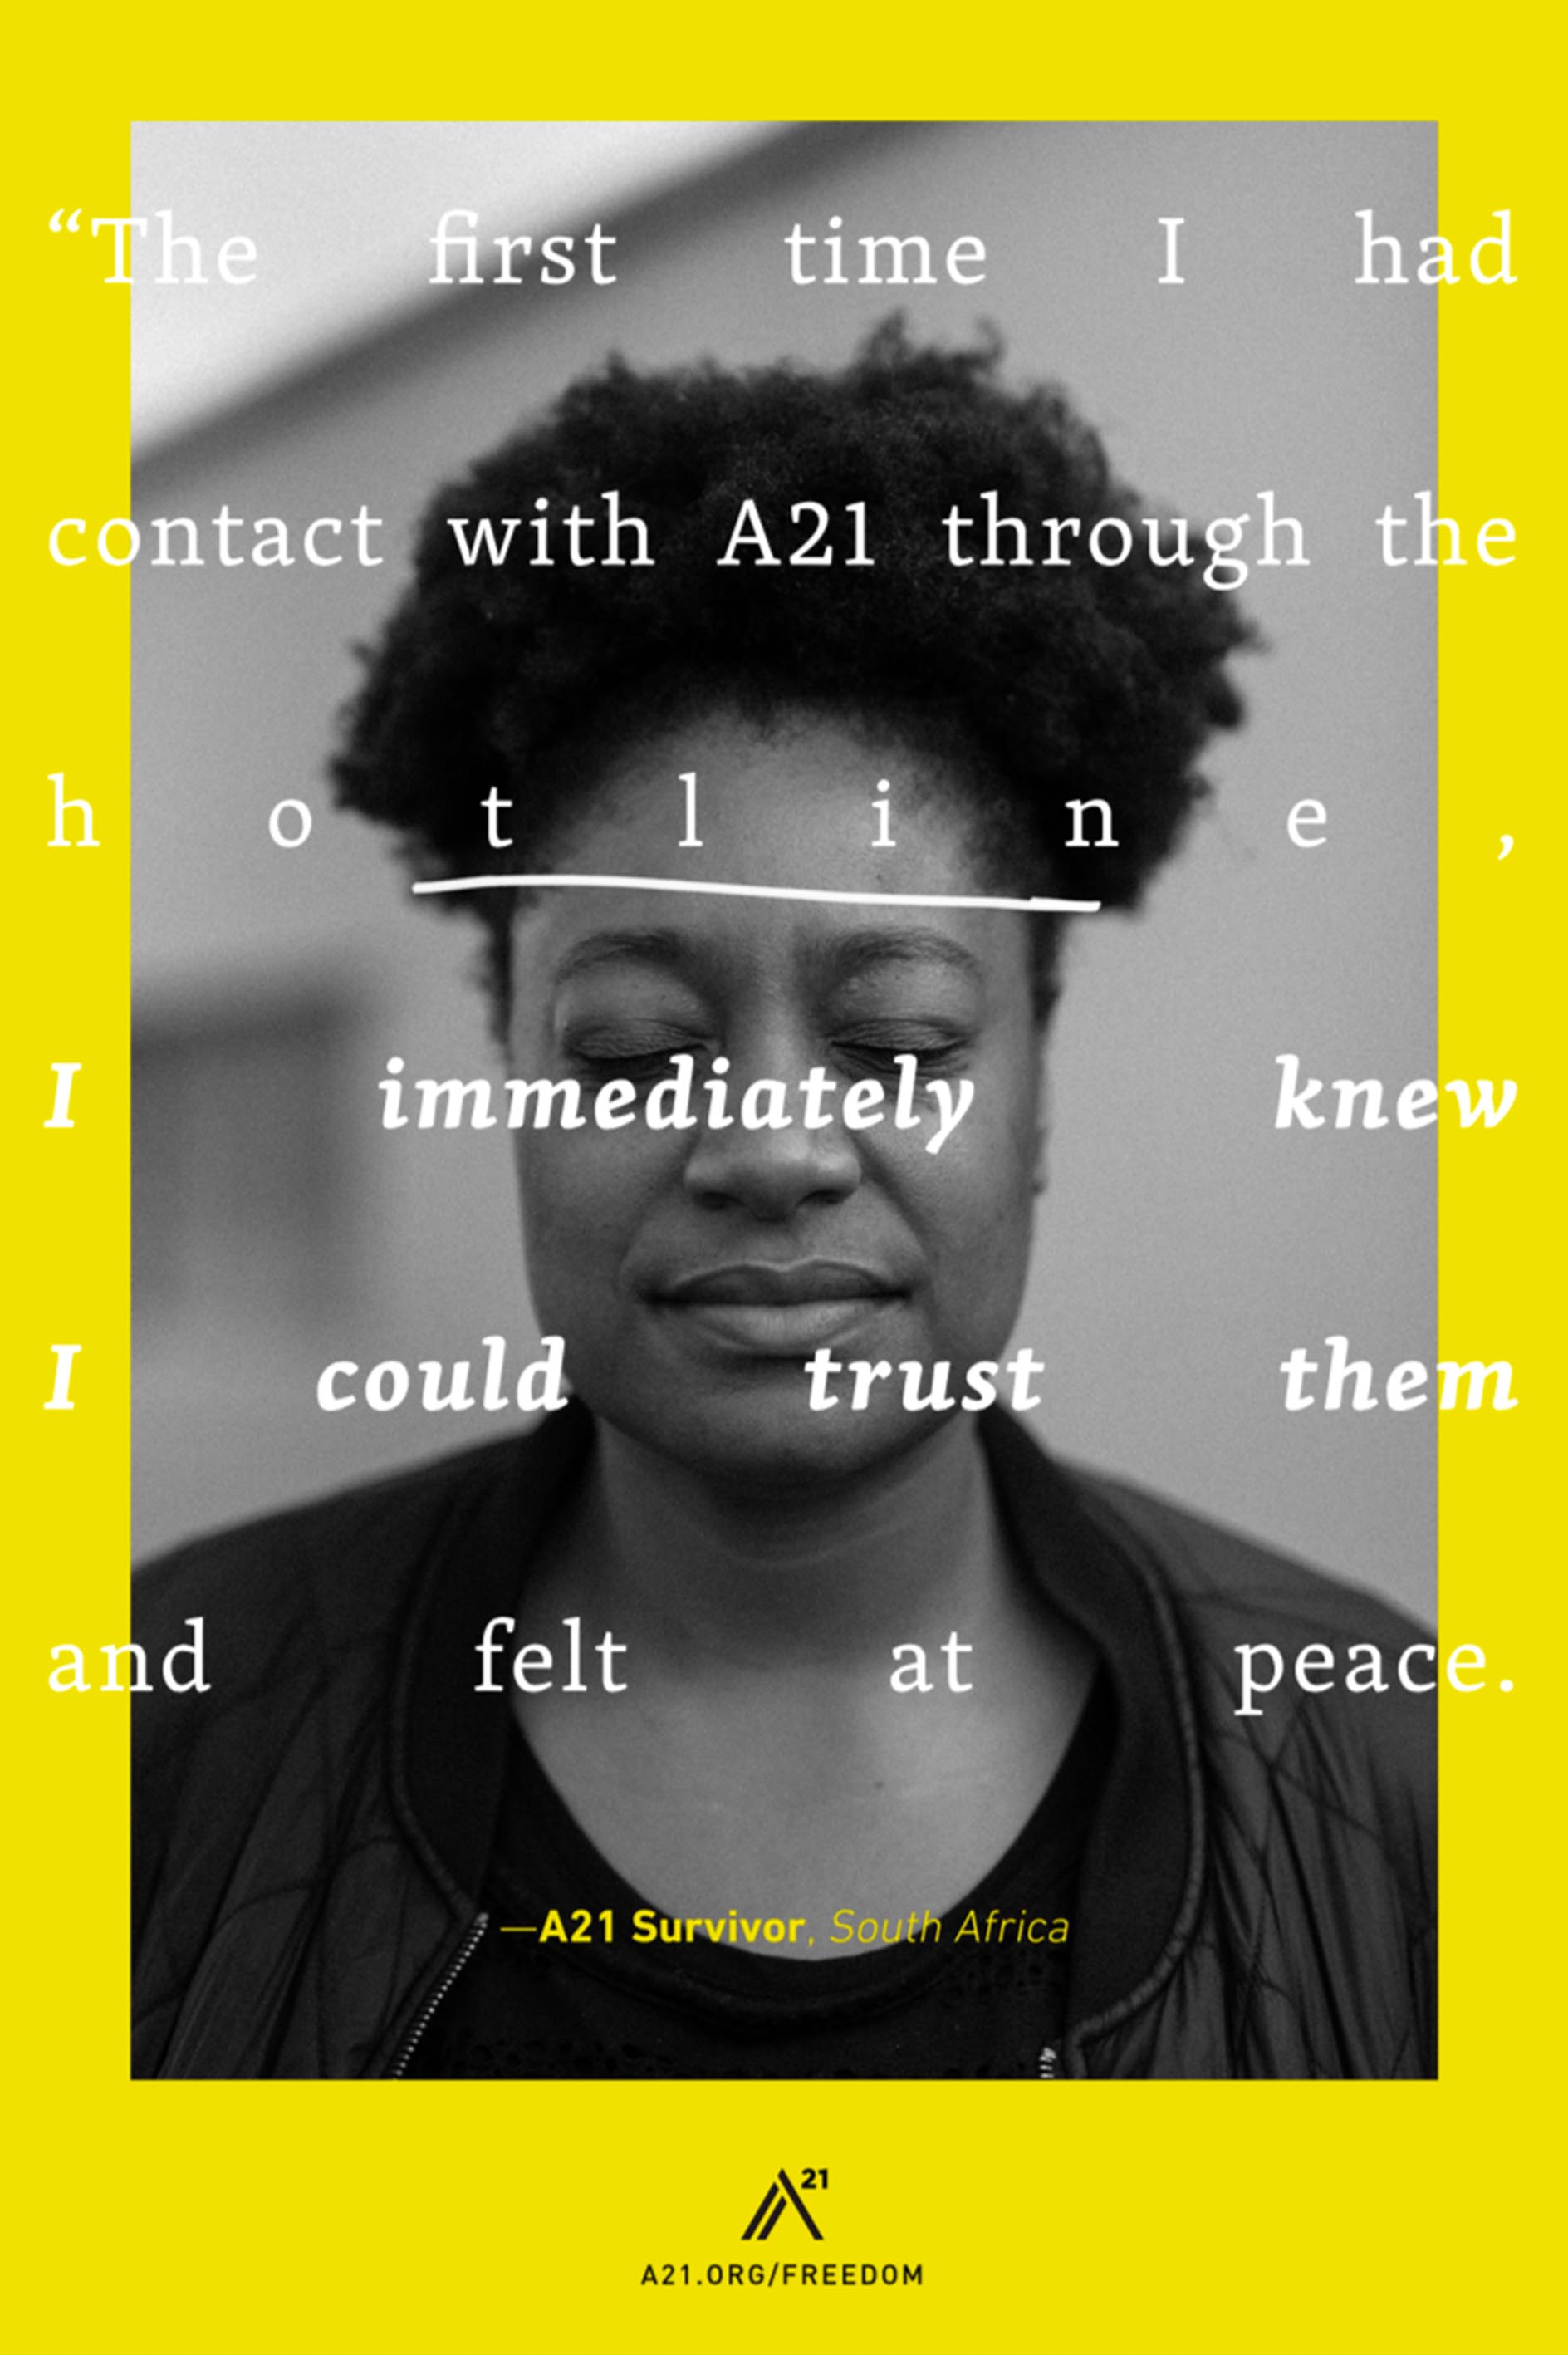 Poster 10: The first time I had contact with A21 through the hotline, I immediately knew I could trust them and felt at peace.